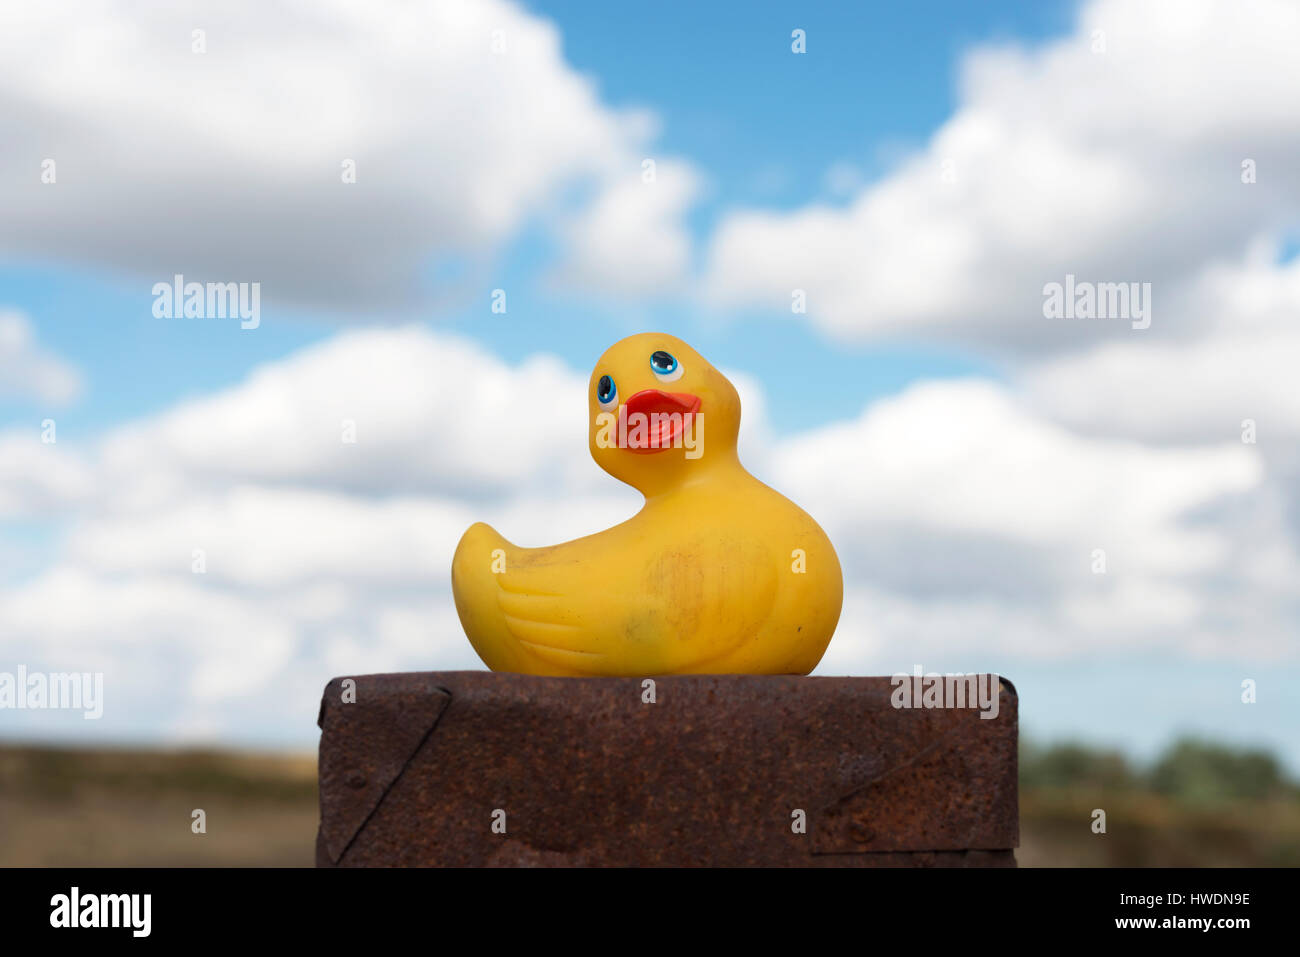 Rubber duck left behind Stock Photo